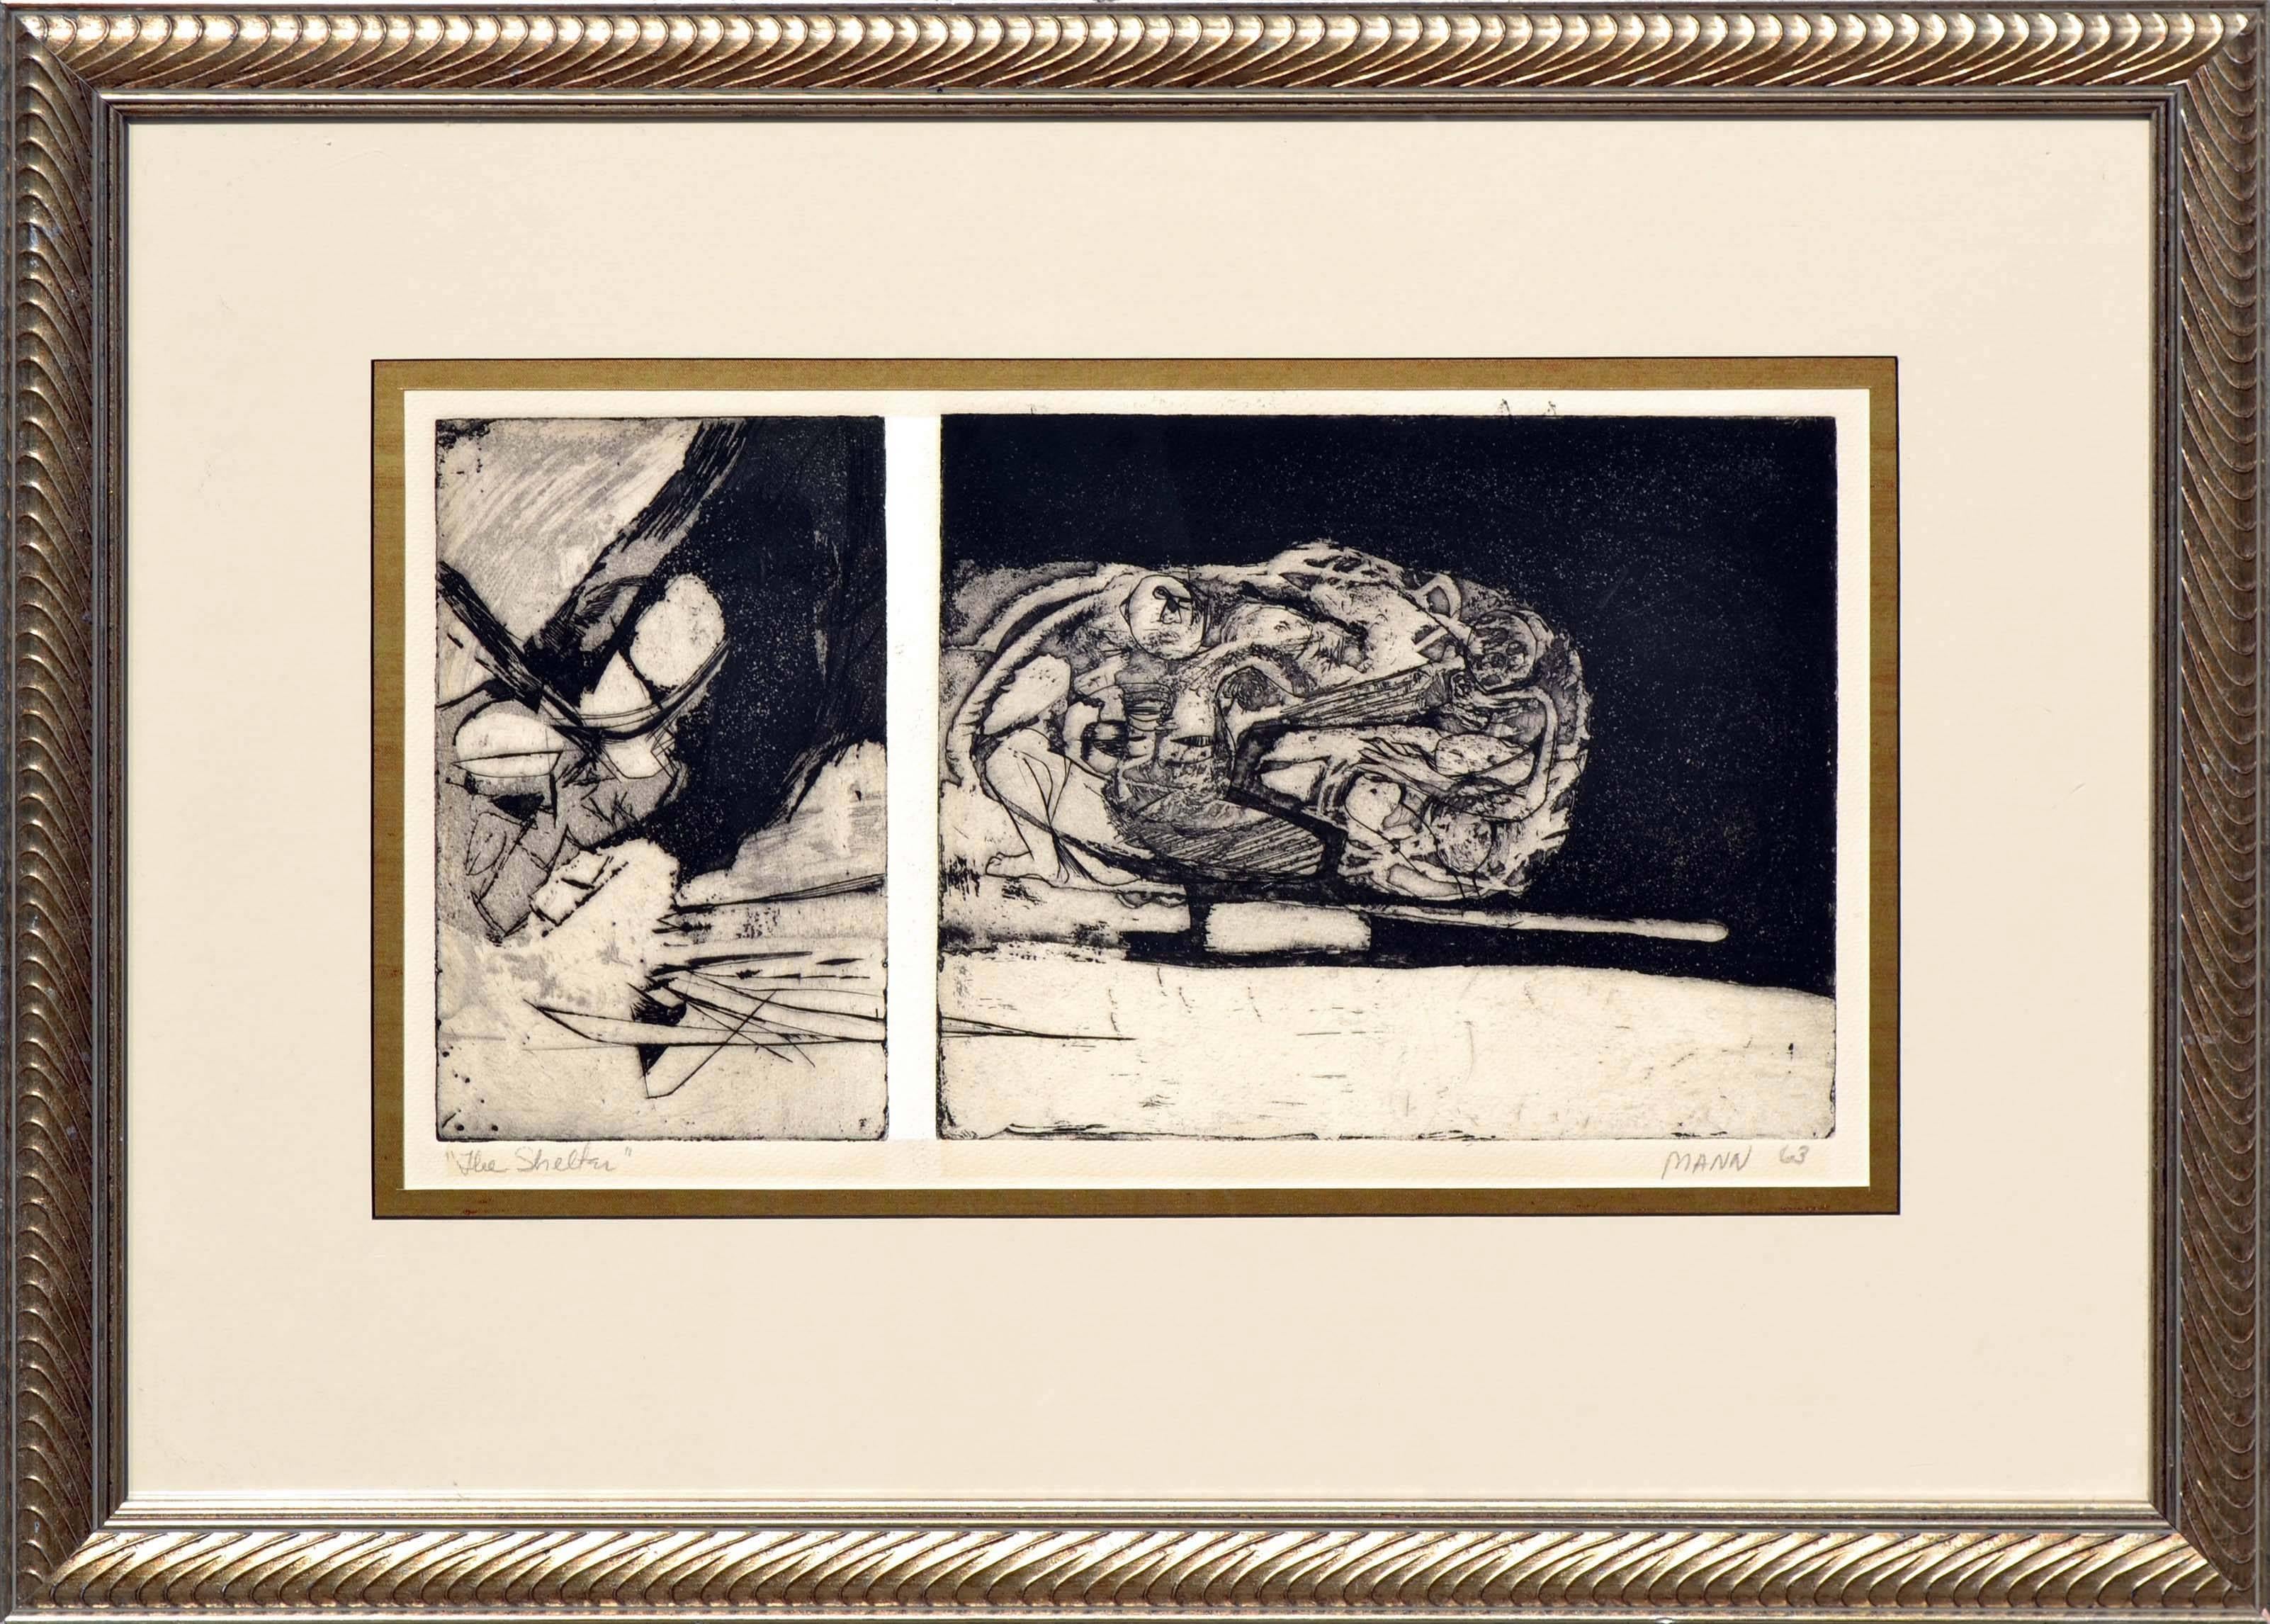 Barbara Mann Abstract Print - "The Shelter" - Mid Century Abstract Etching